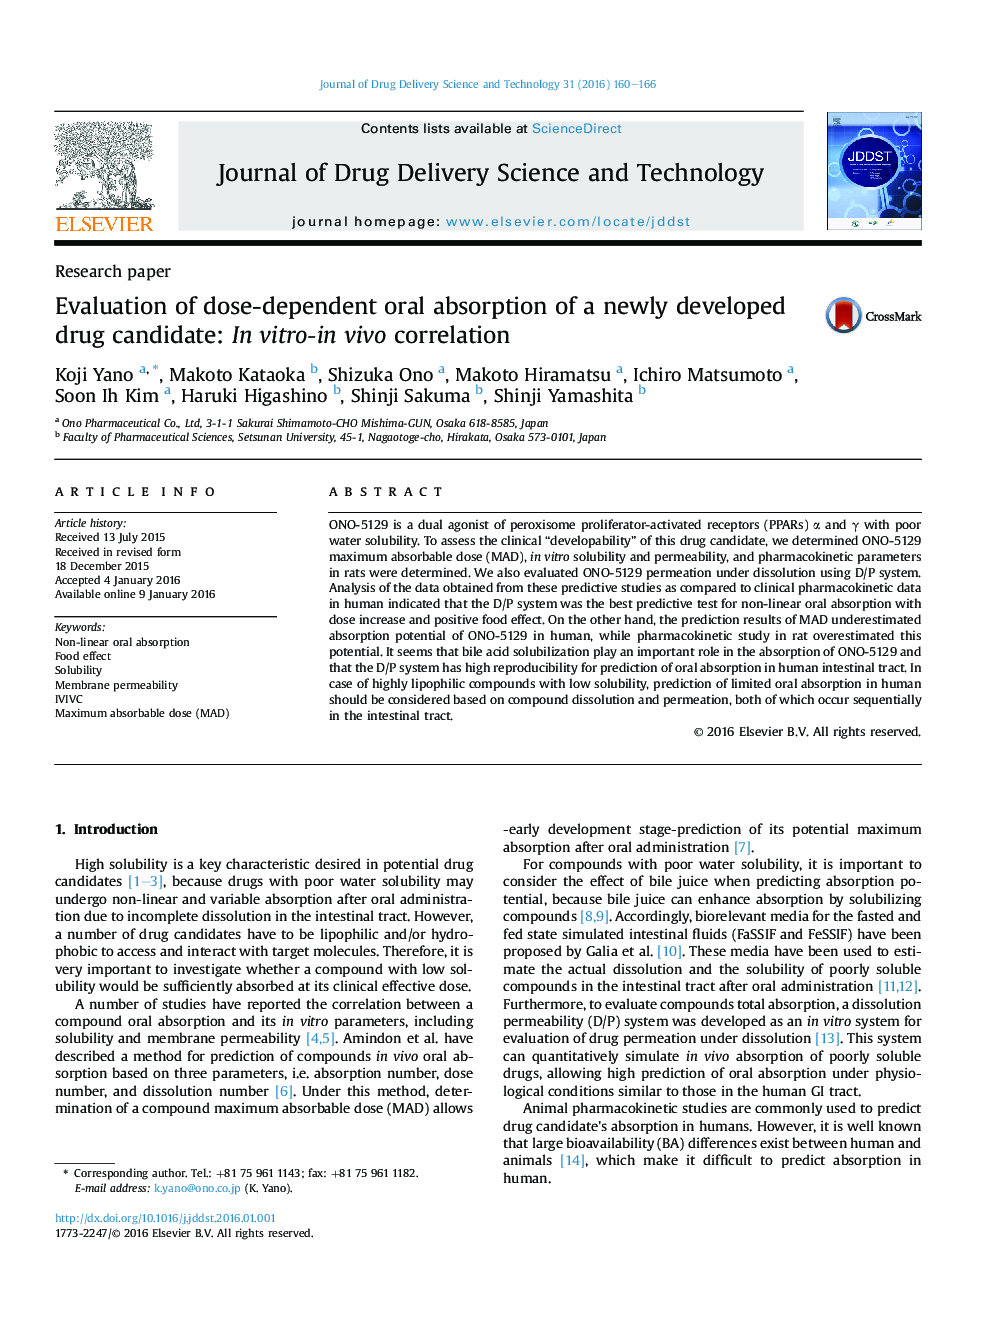 Evaluation of dose-dependent oral absorption of a newly developed drug candidate: In vitro-in vivo correlation